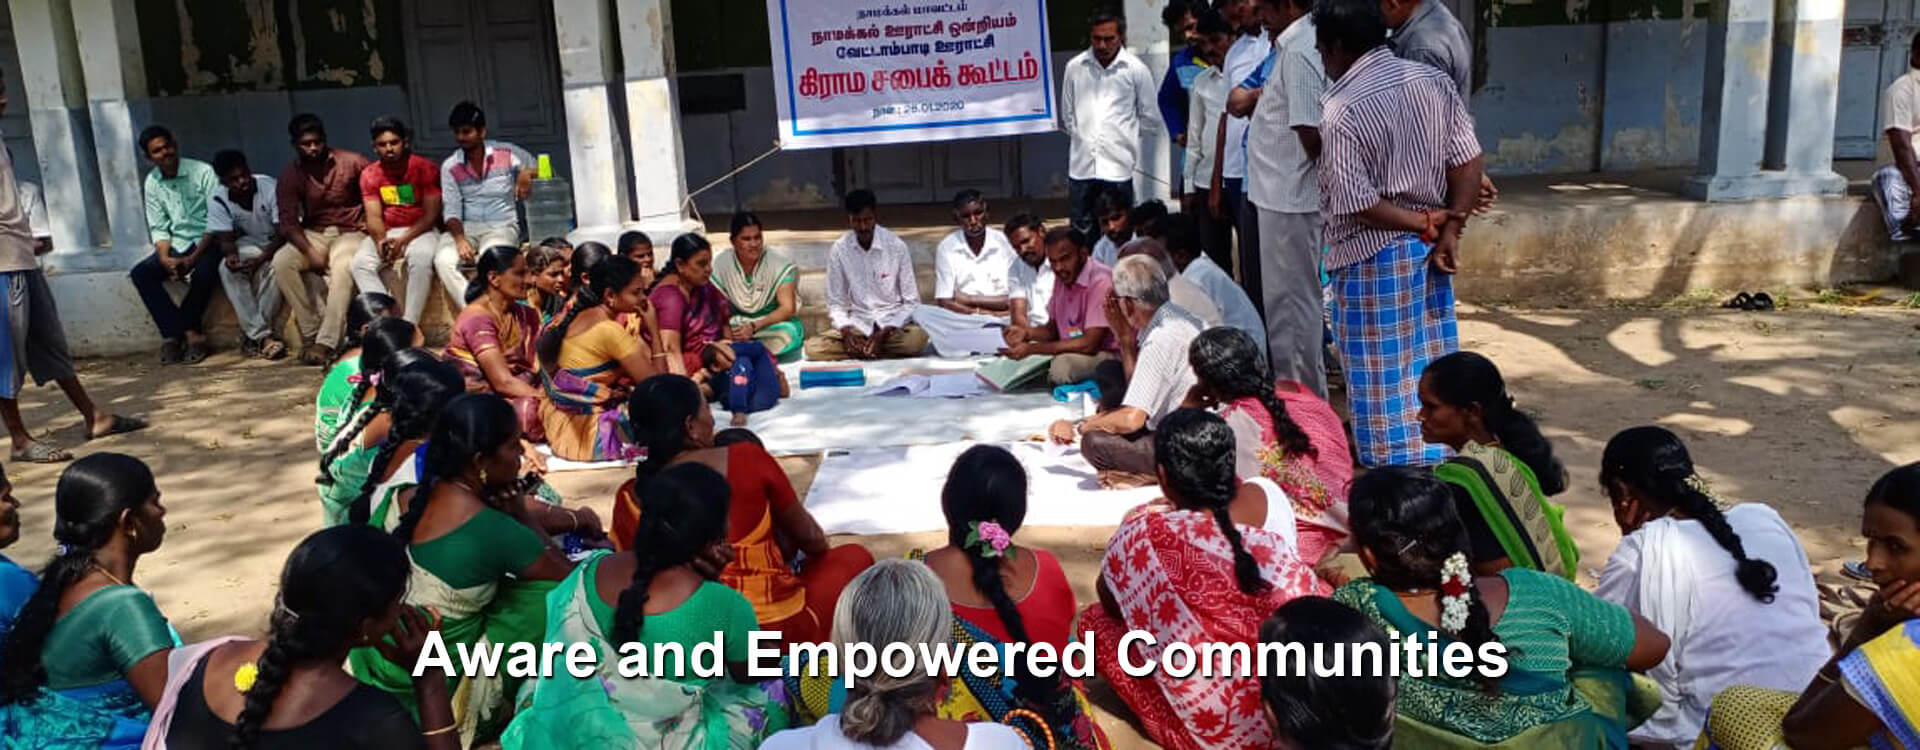 aware-and-empowered-communities-banner